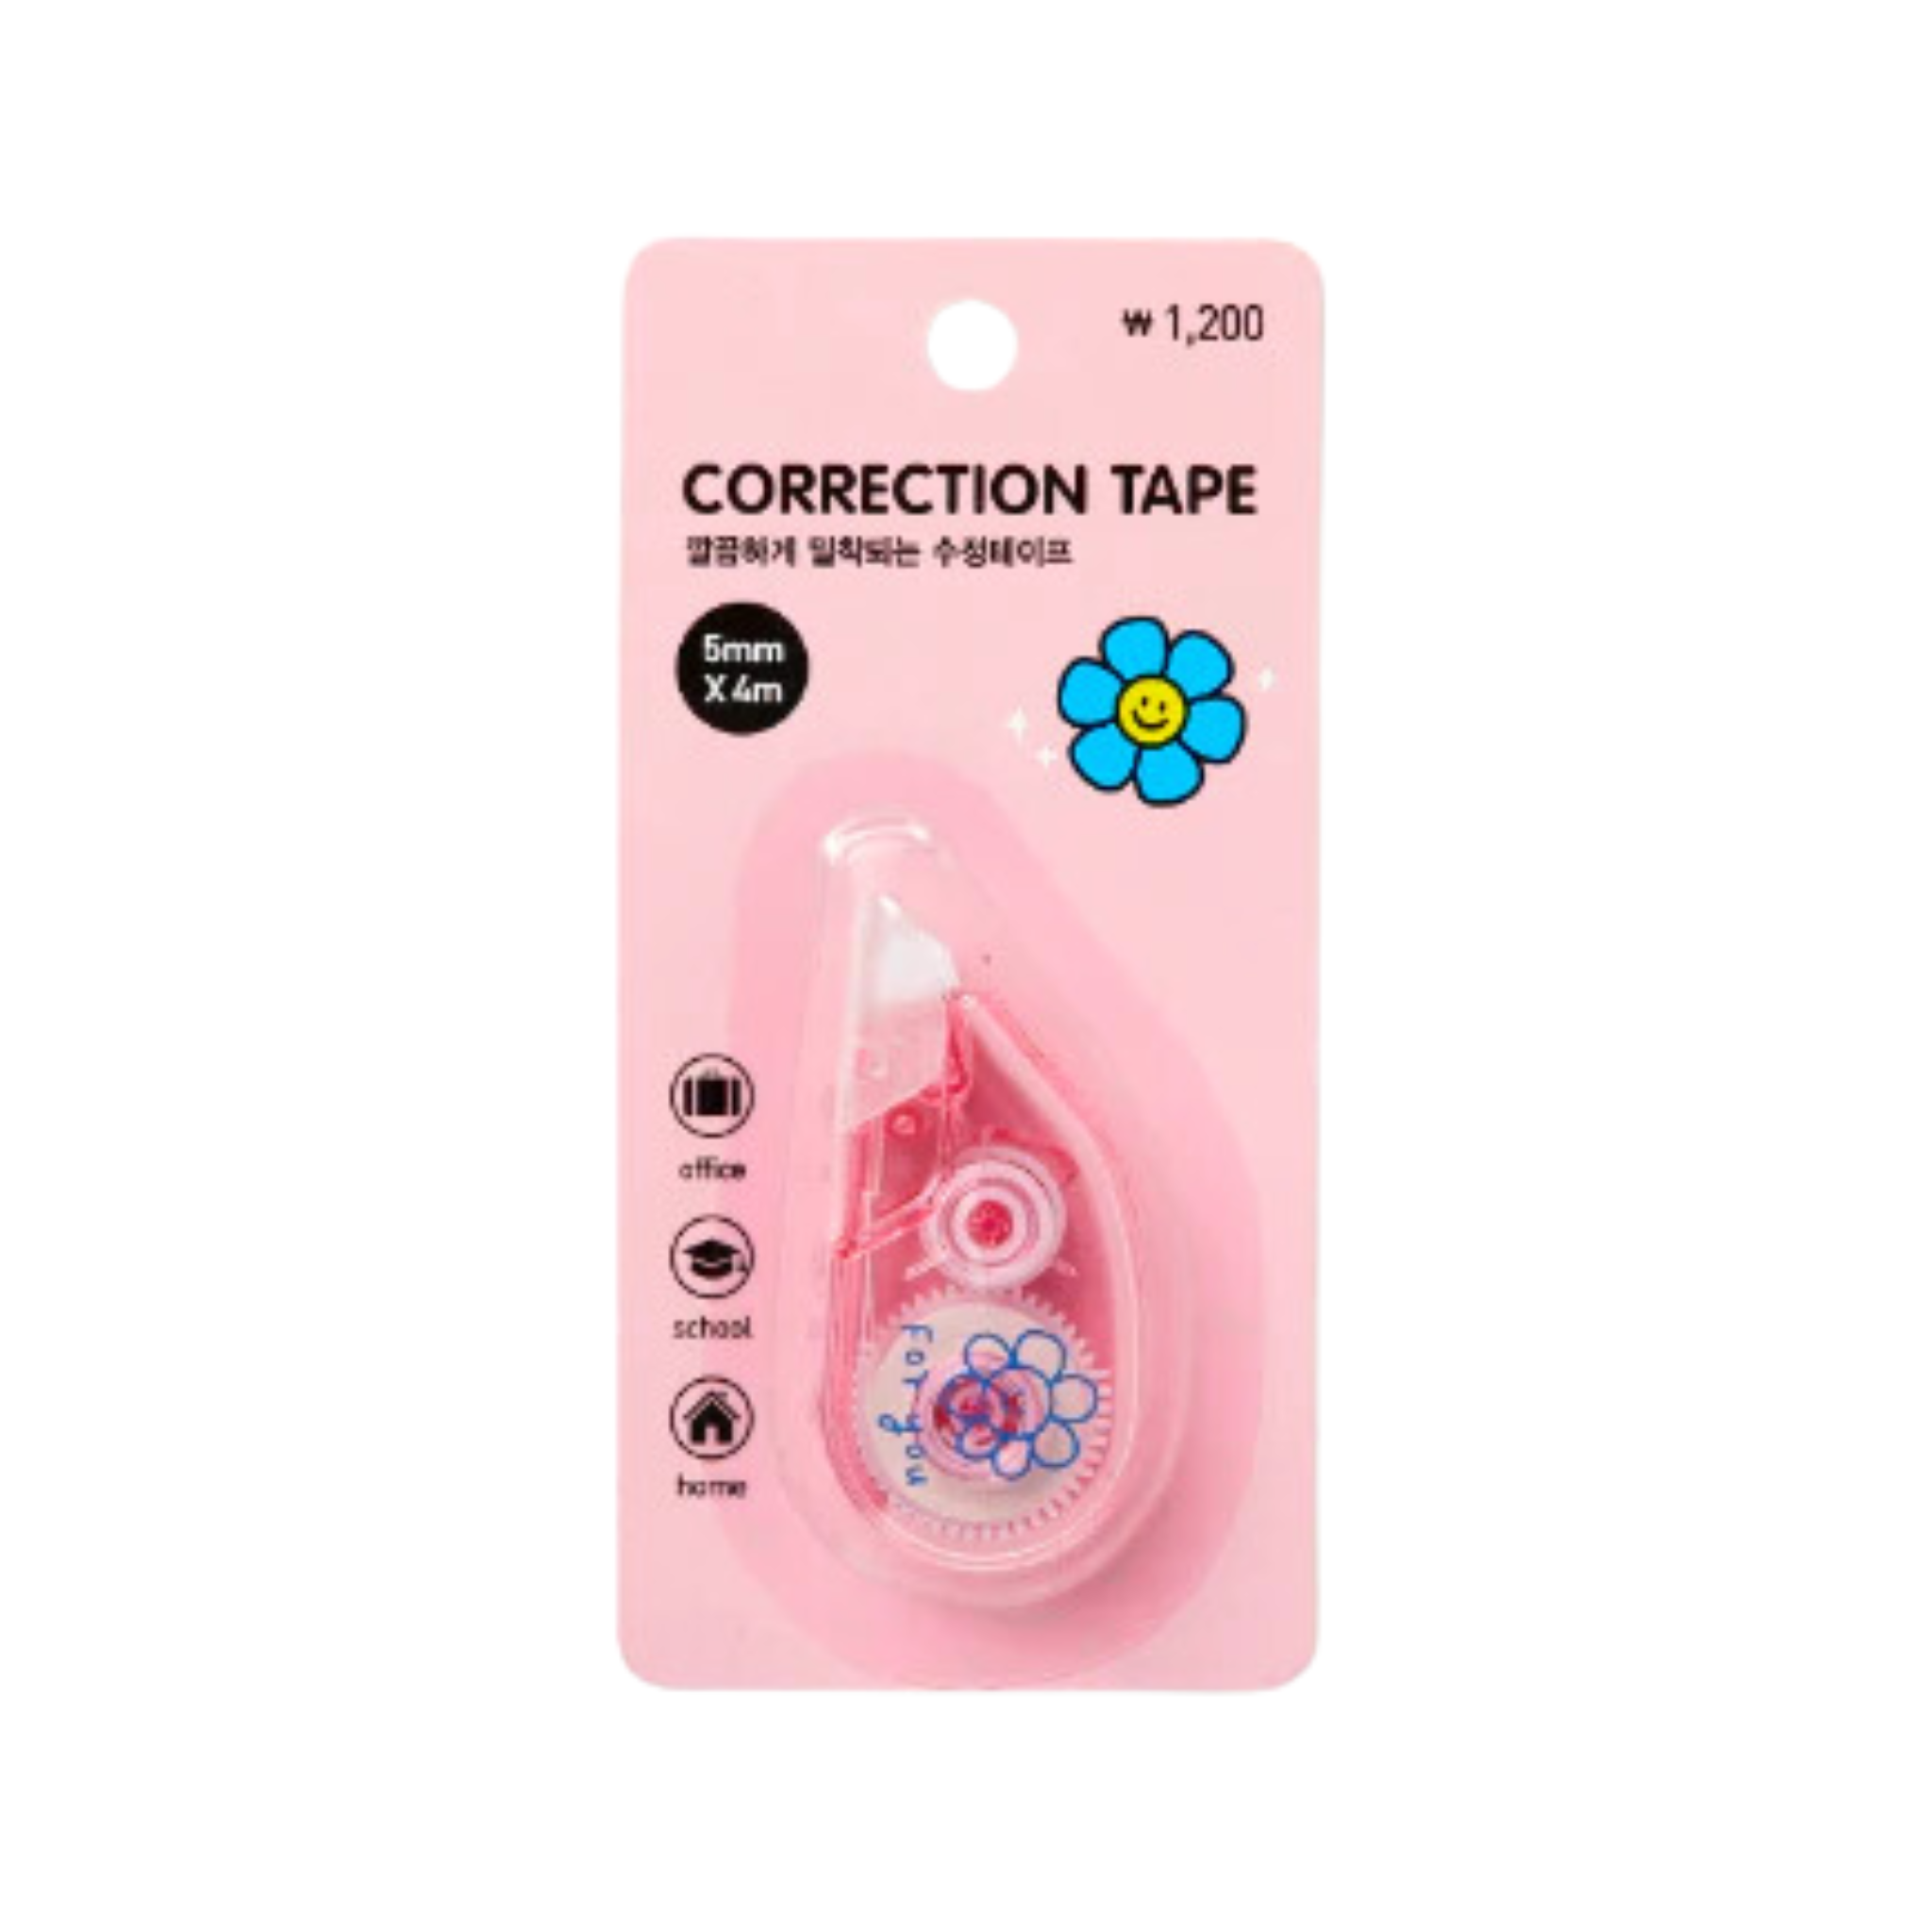 CorrectionTapeFlower5mm.png